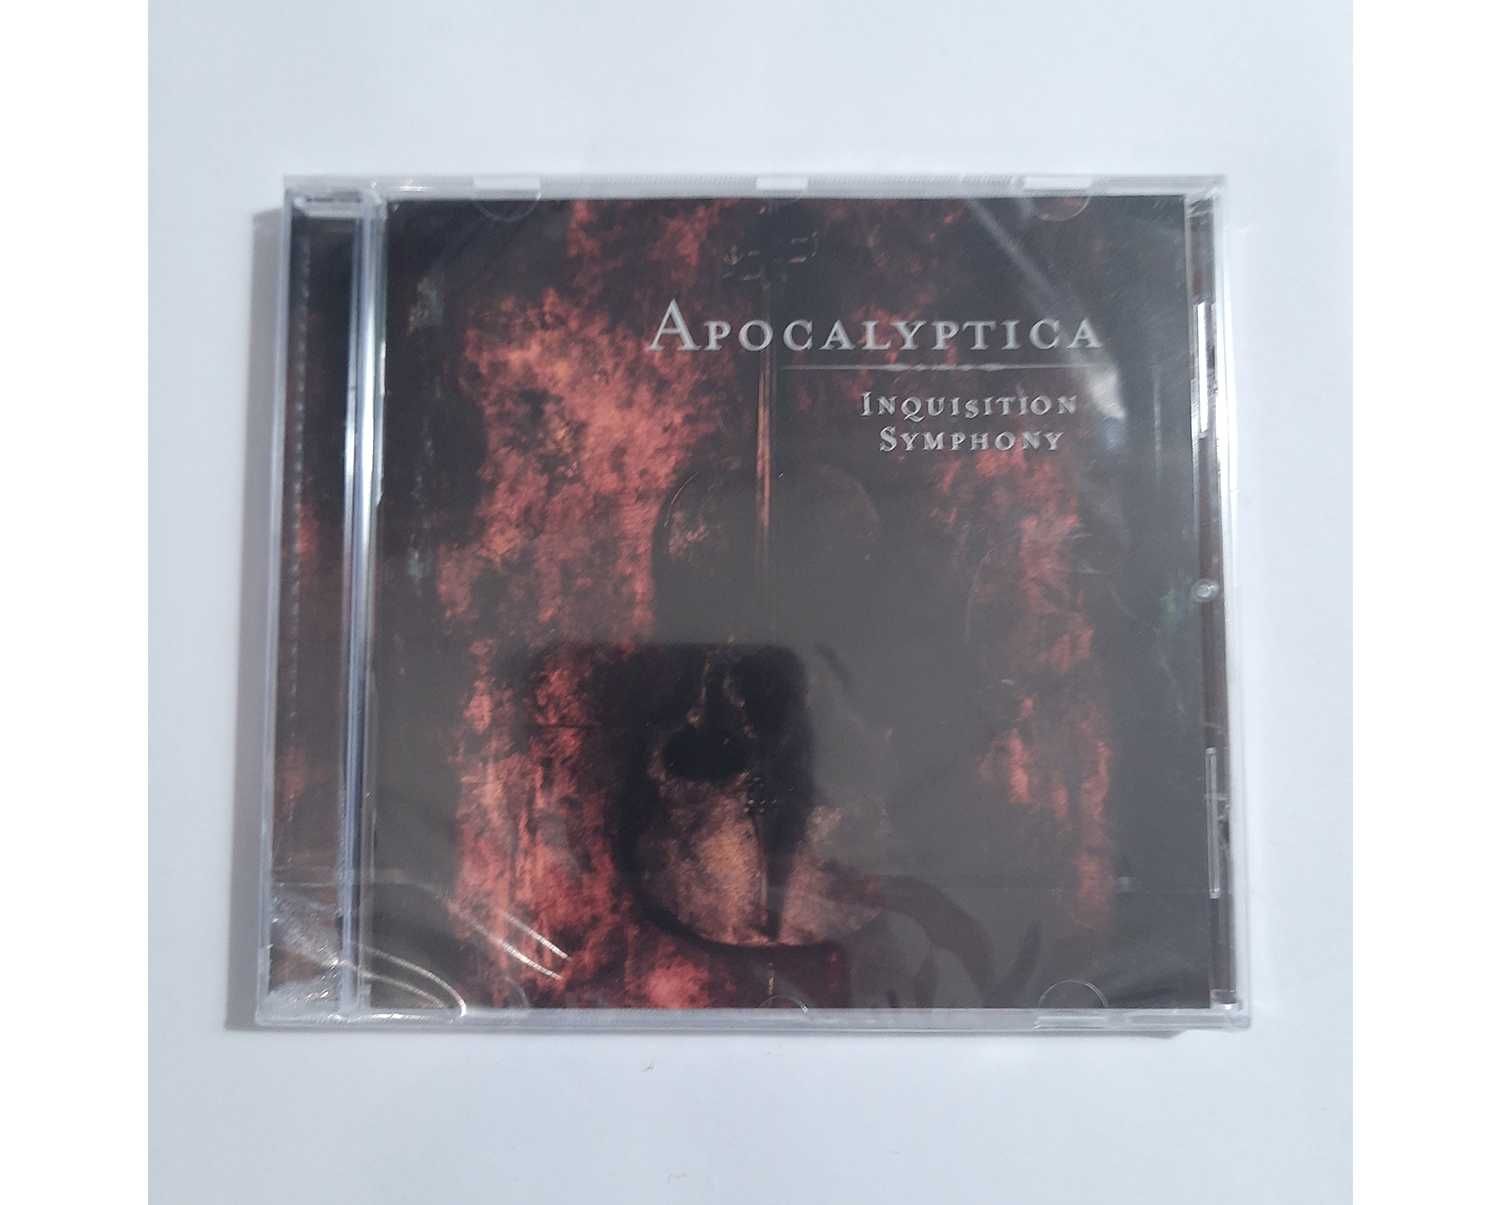 CD Inquisition Symphony Apocalyptica